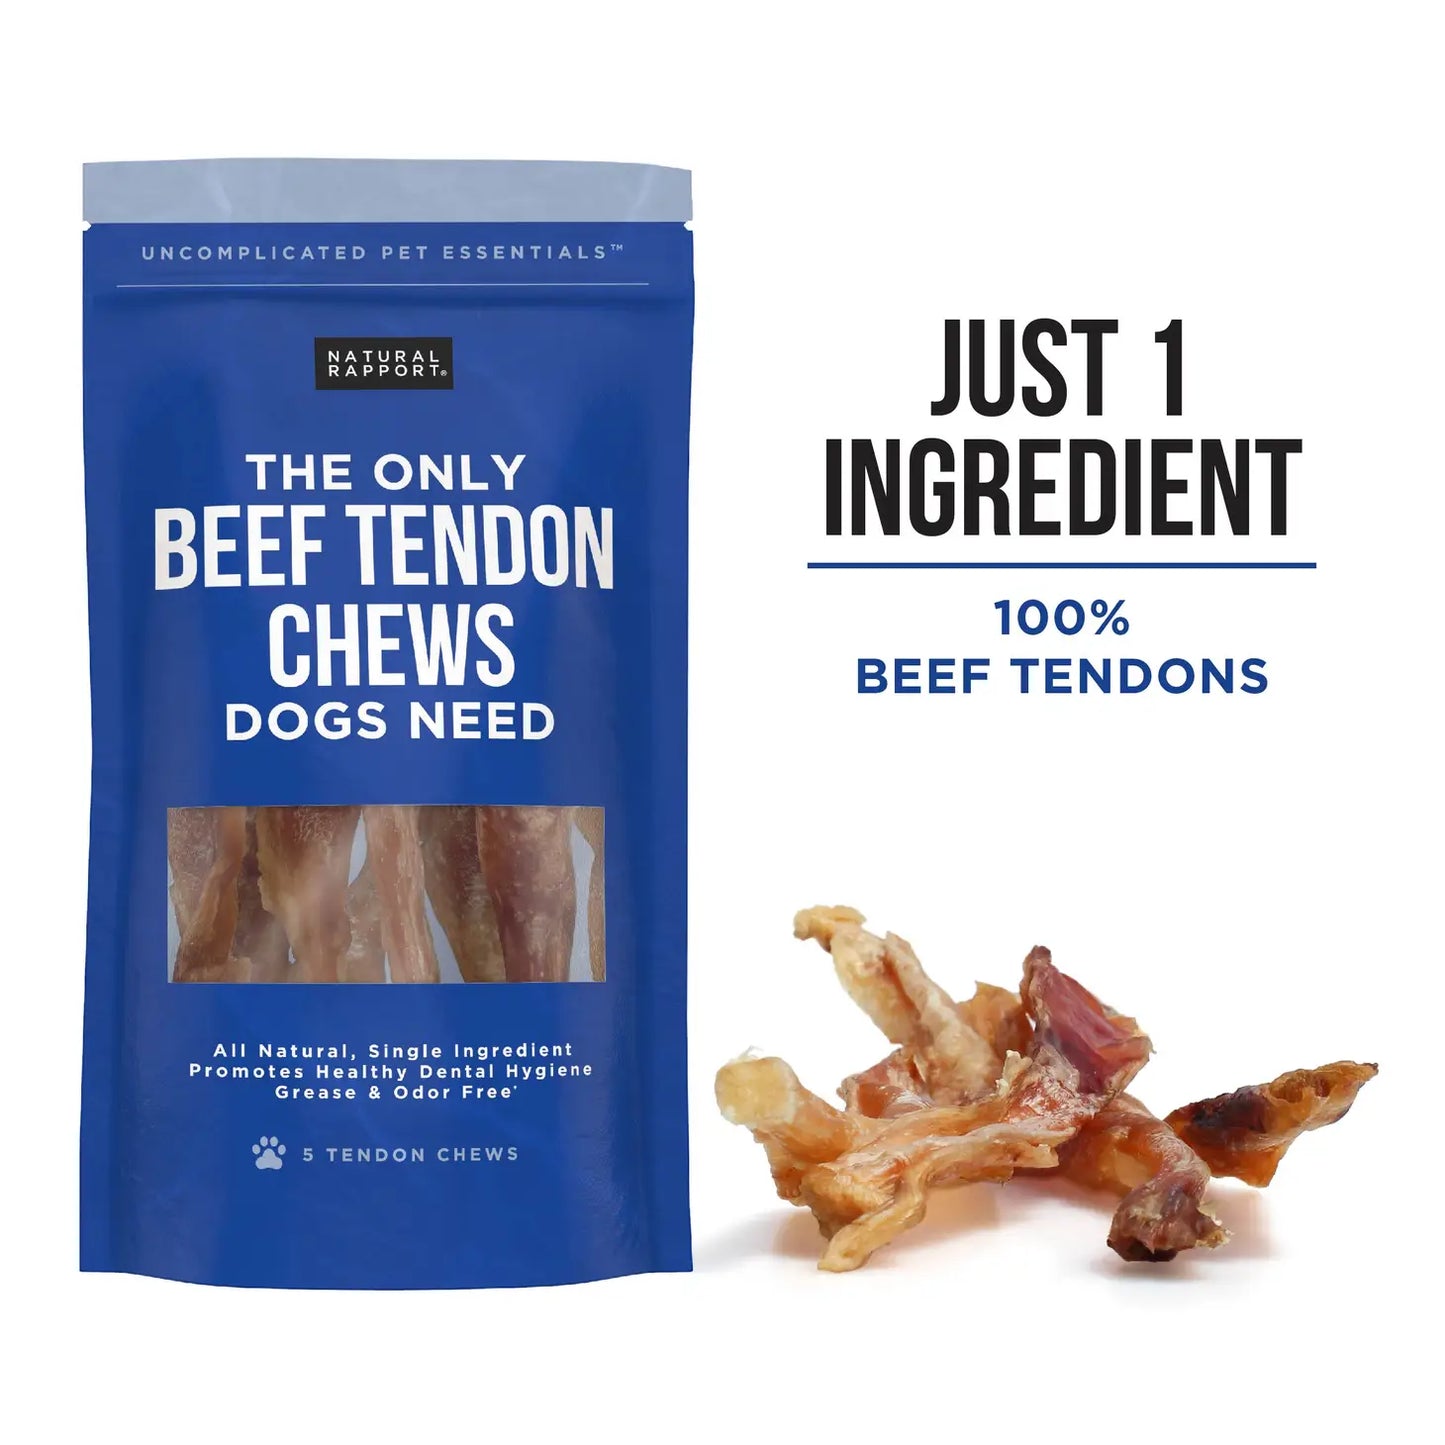 Natural Rapport The Only Beef Tendon Chews Dogs Need - 5 Tendons